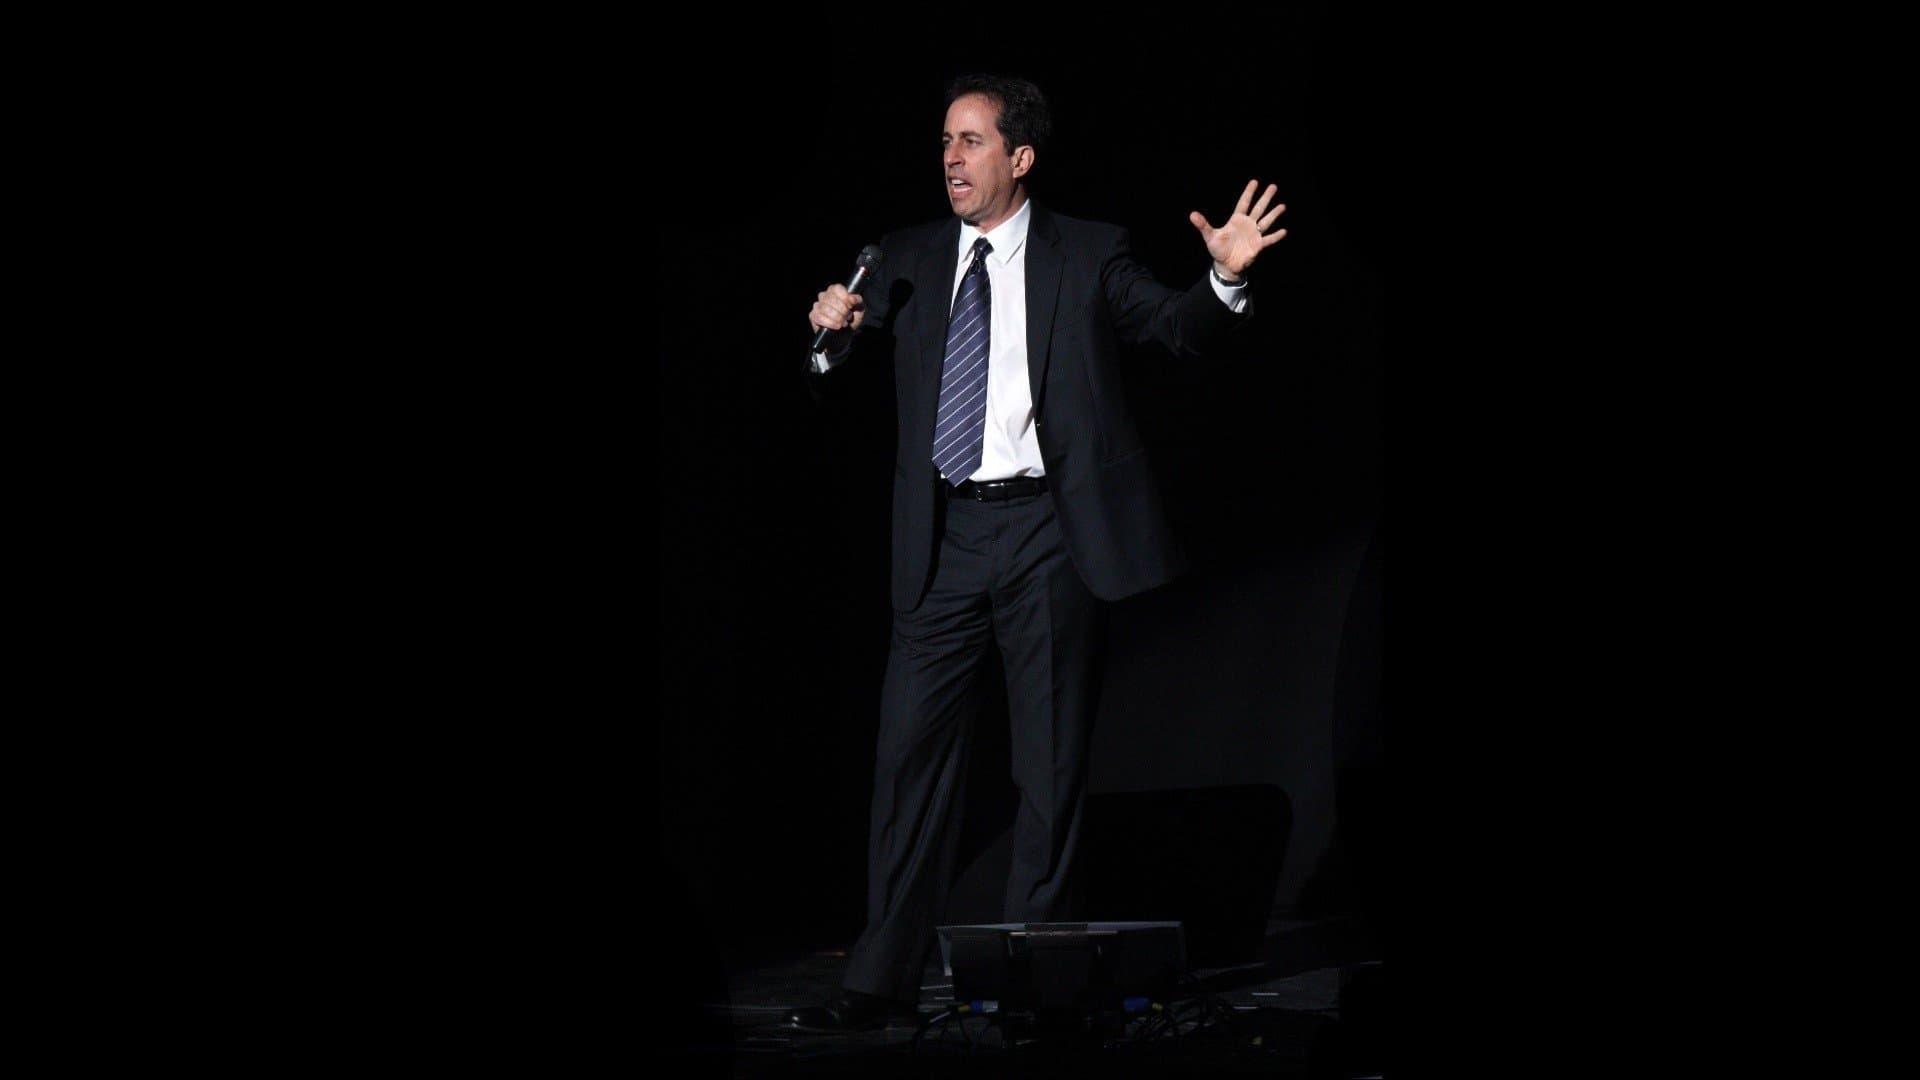 Jerry Seinfeld: I'm Telling You for the Last Time backdrop